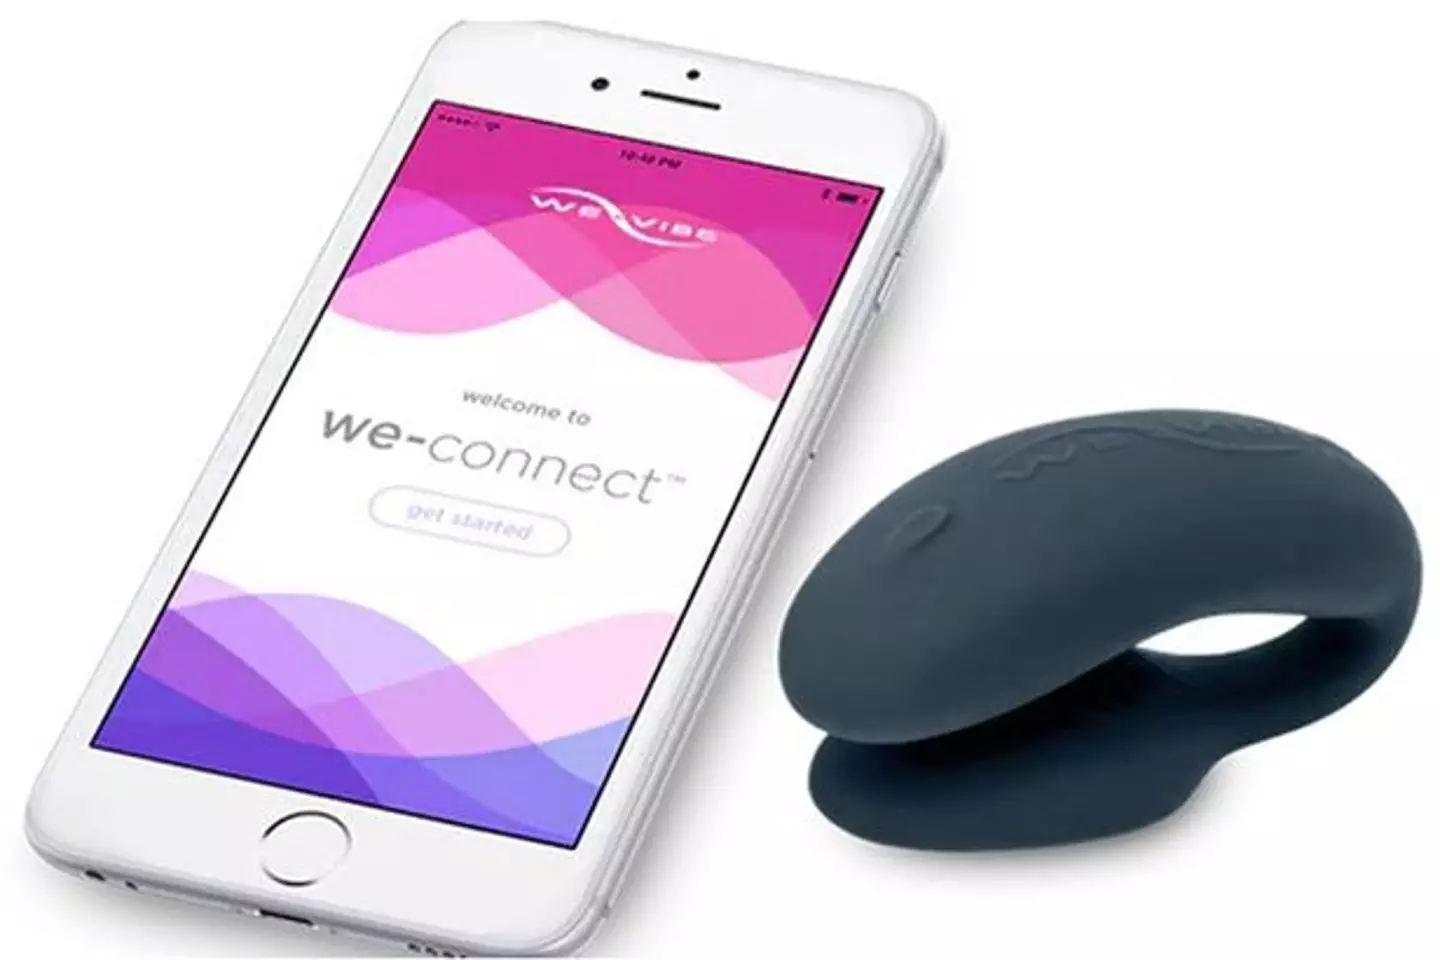 The smart vibrator was able to track the user's sexual activity.